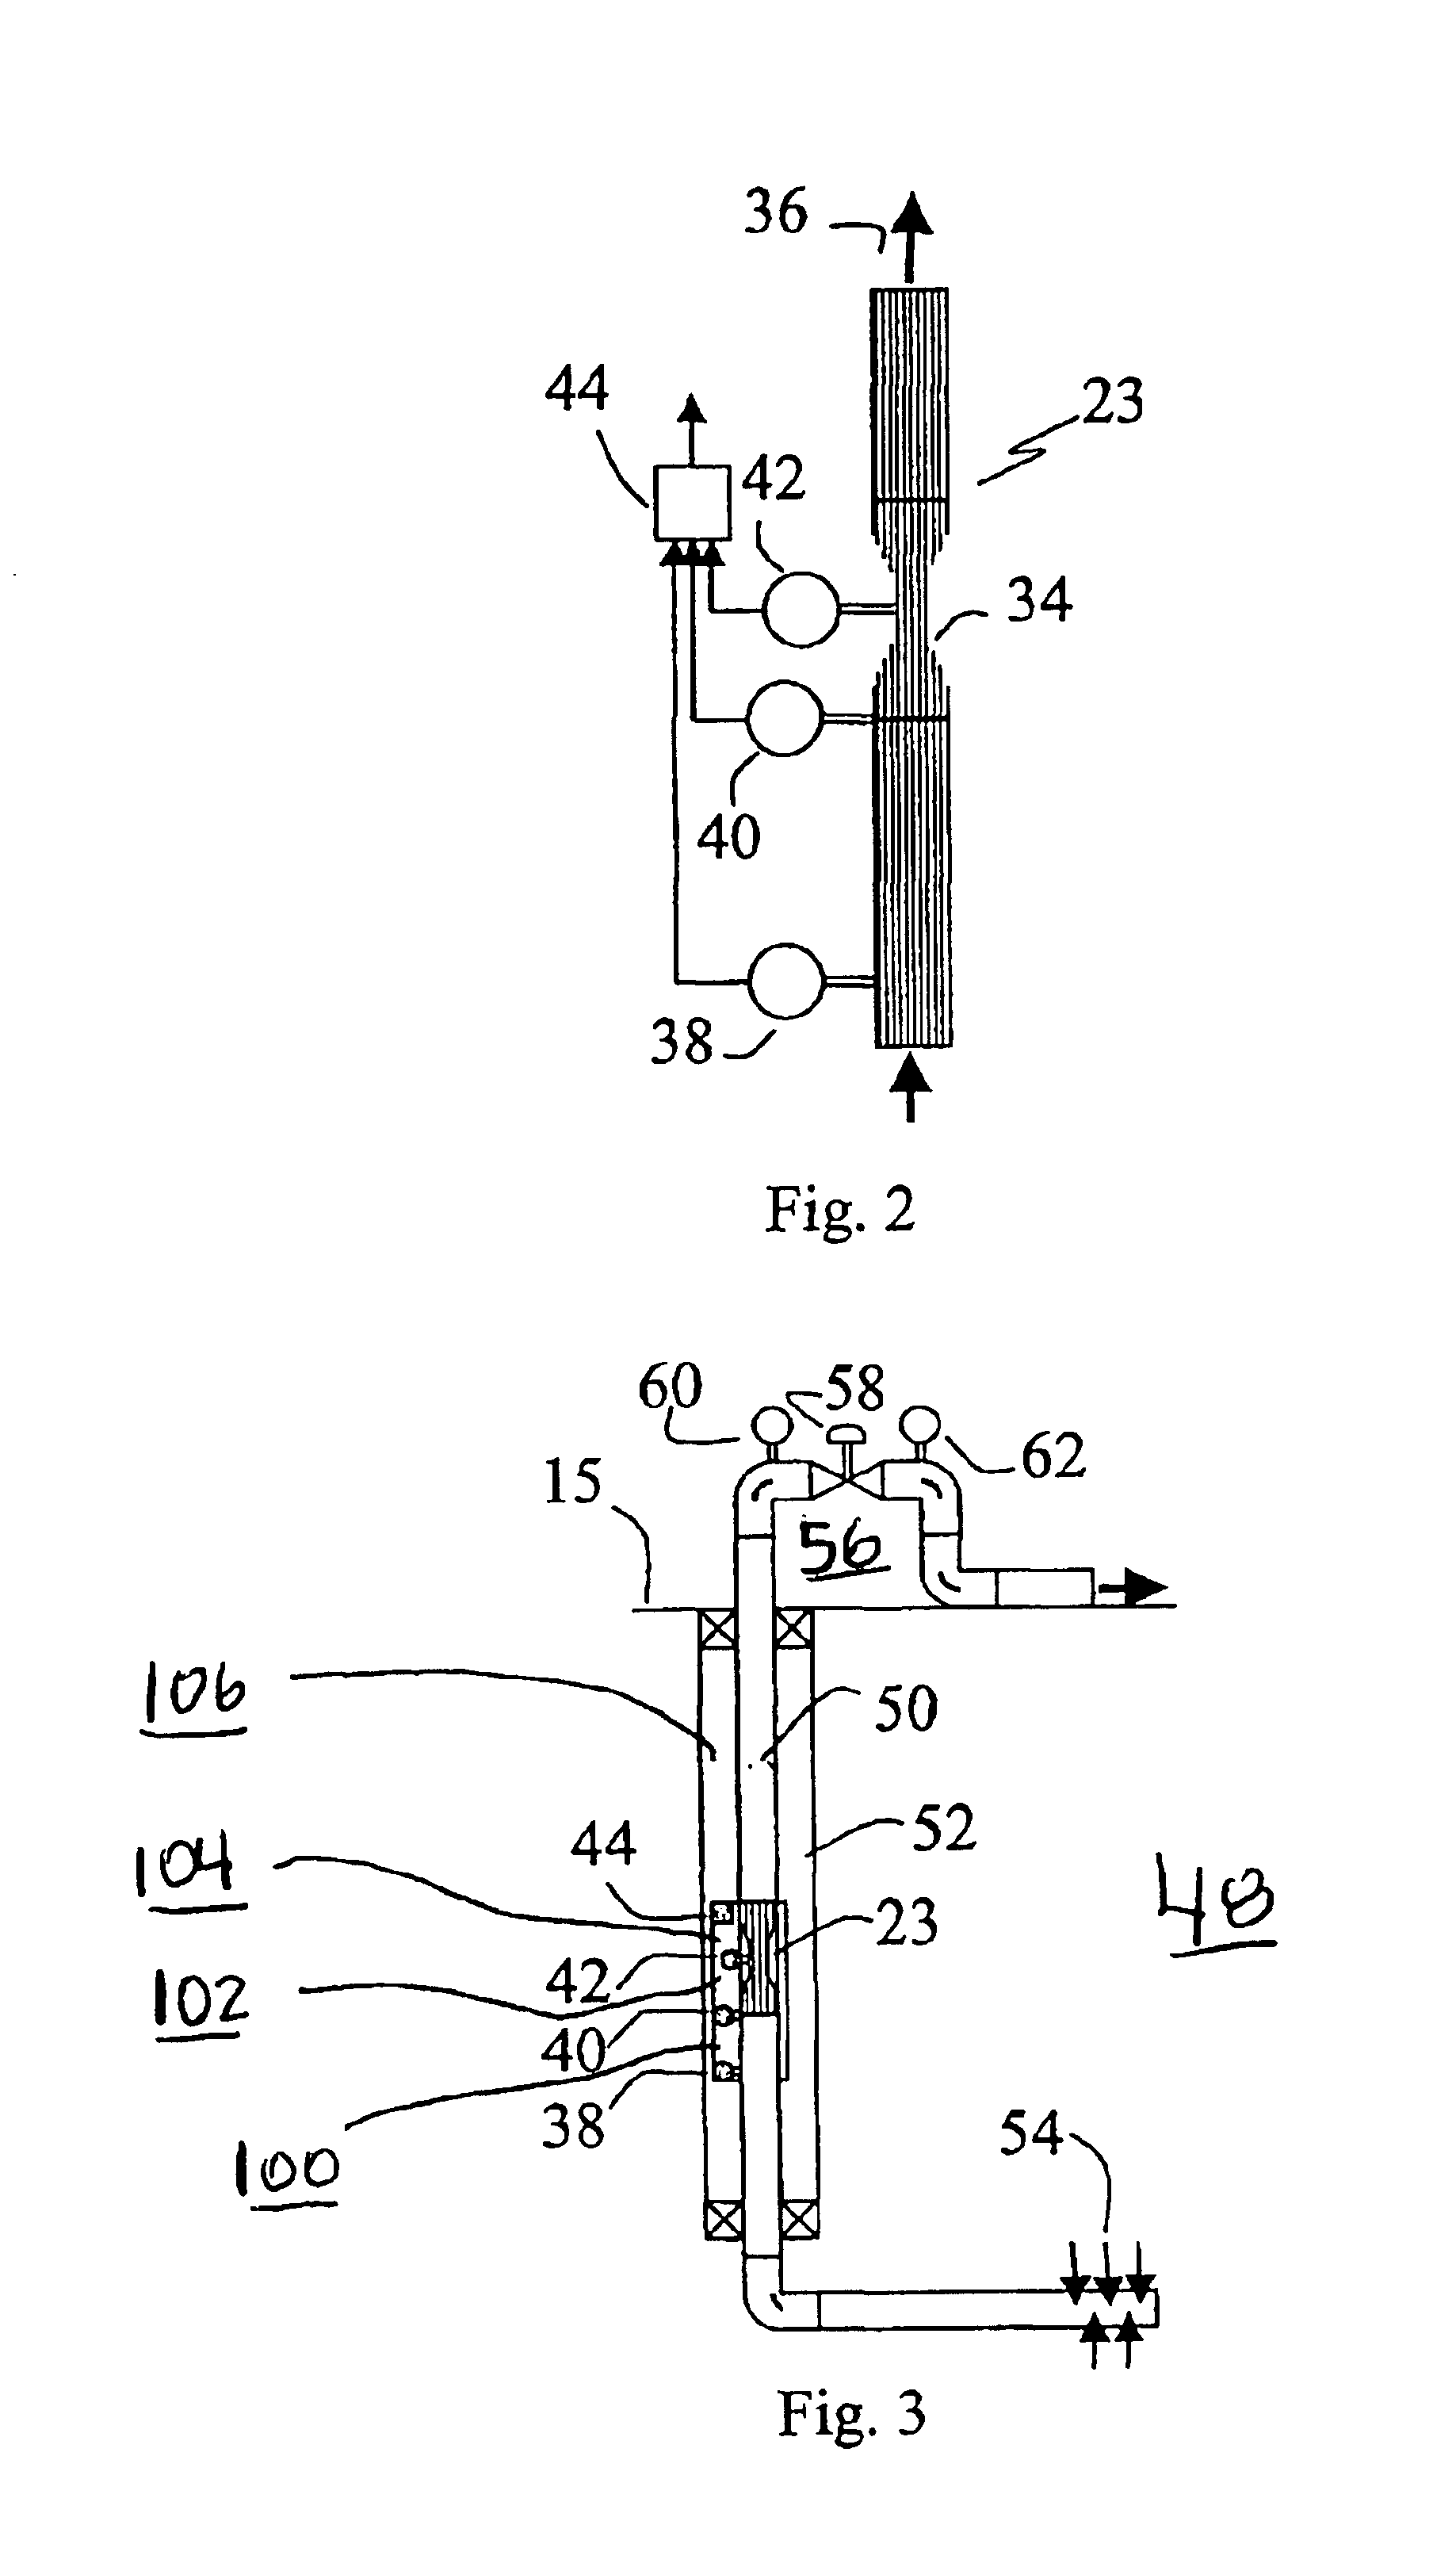 Method for detecting and correcting sensor failure in oil and gas production system